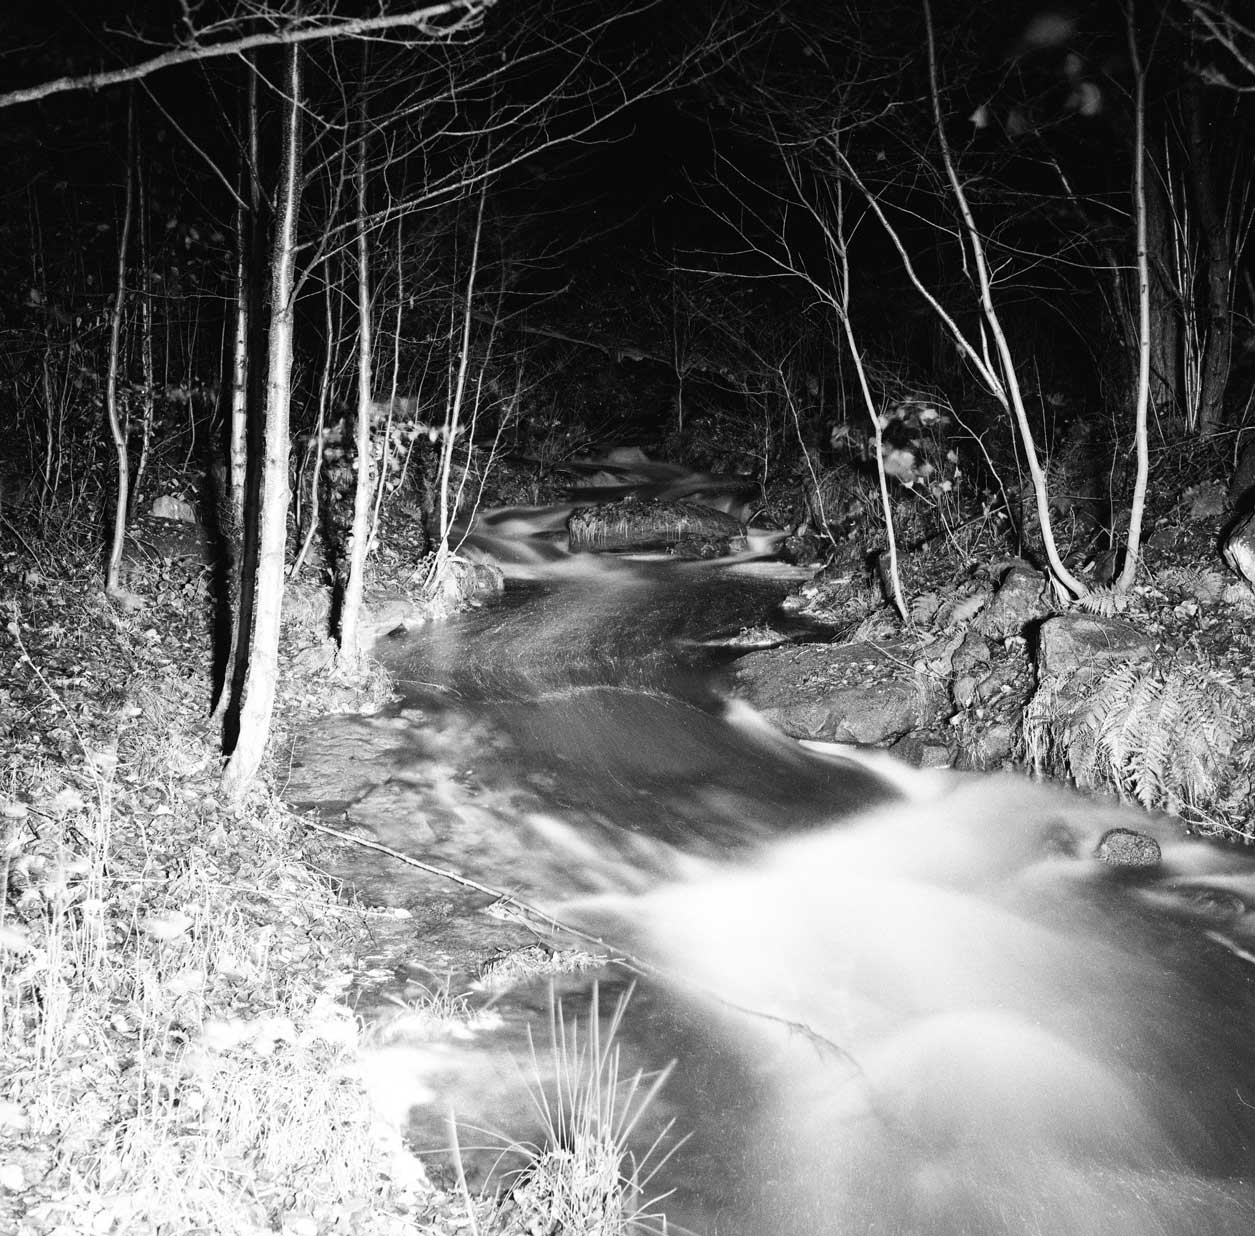 Nighttime - a black and white photograph of river by John Arnison.